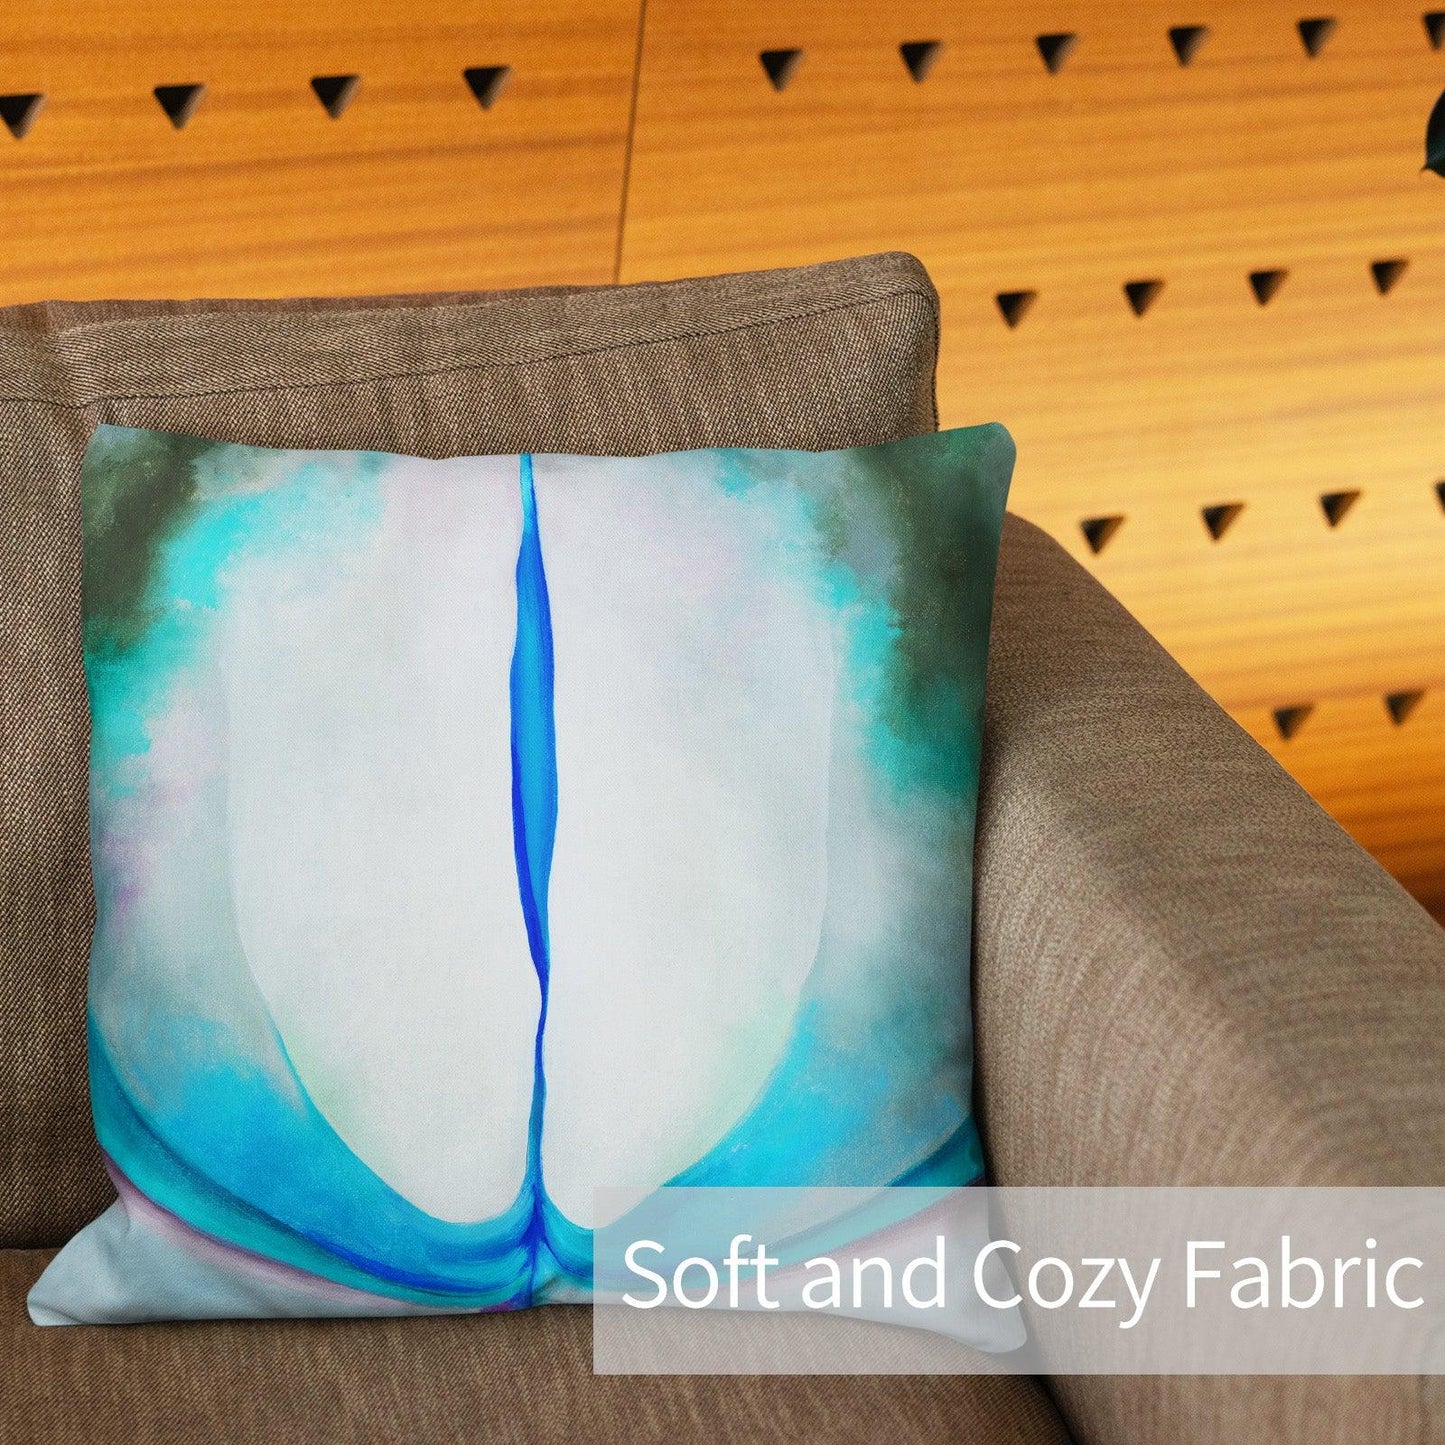 Art Abstract Throw Pillow Covers Pack of 2 18x18 Inch (Blue Line by Georgia O'Keeffe) - Berkin Arts